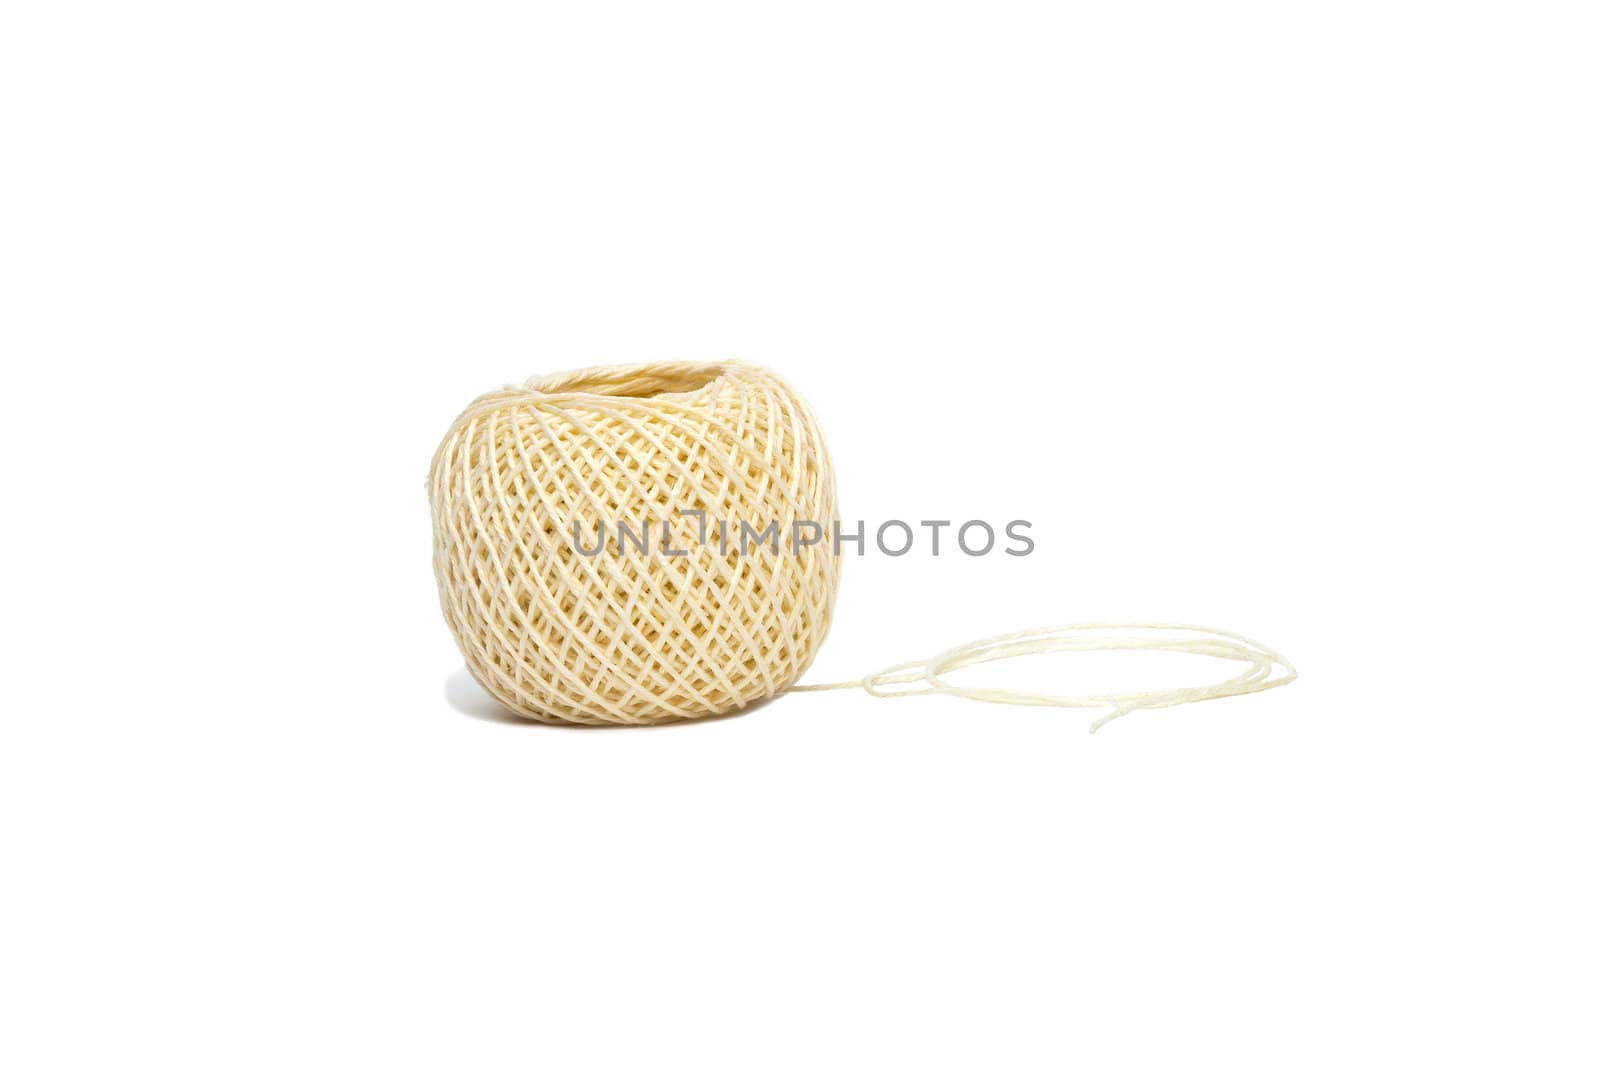 A ball of string unwinding partly on a white background